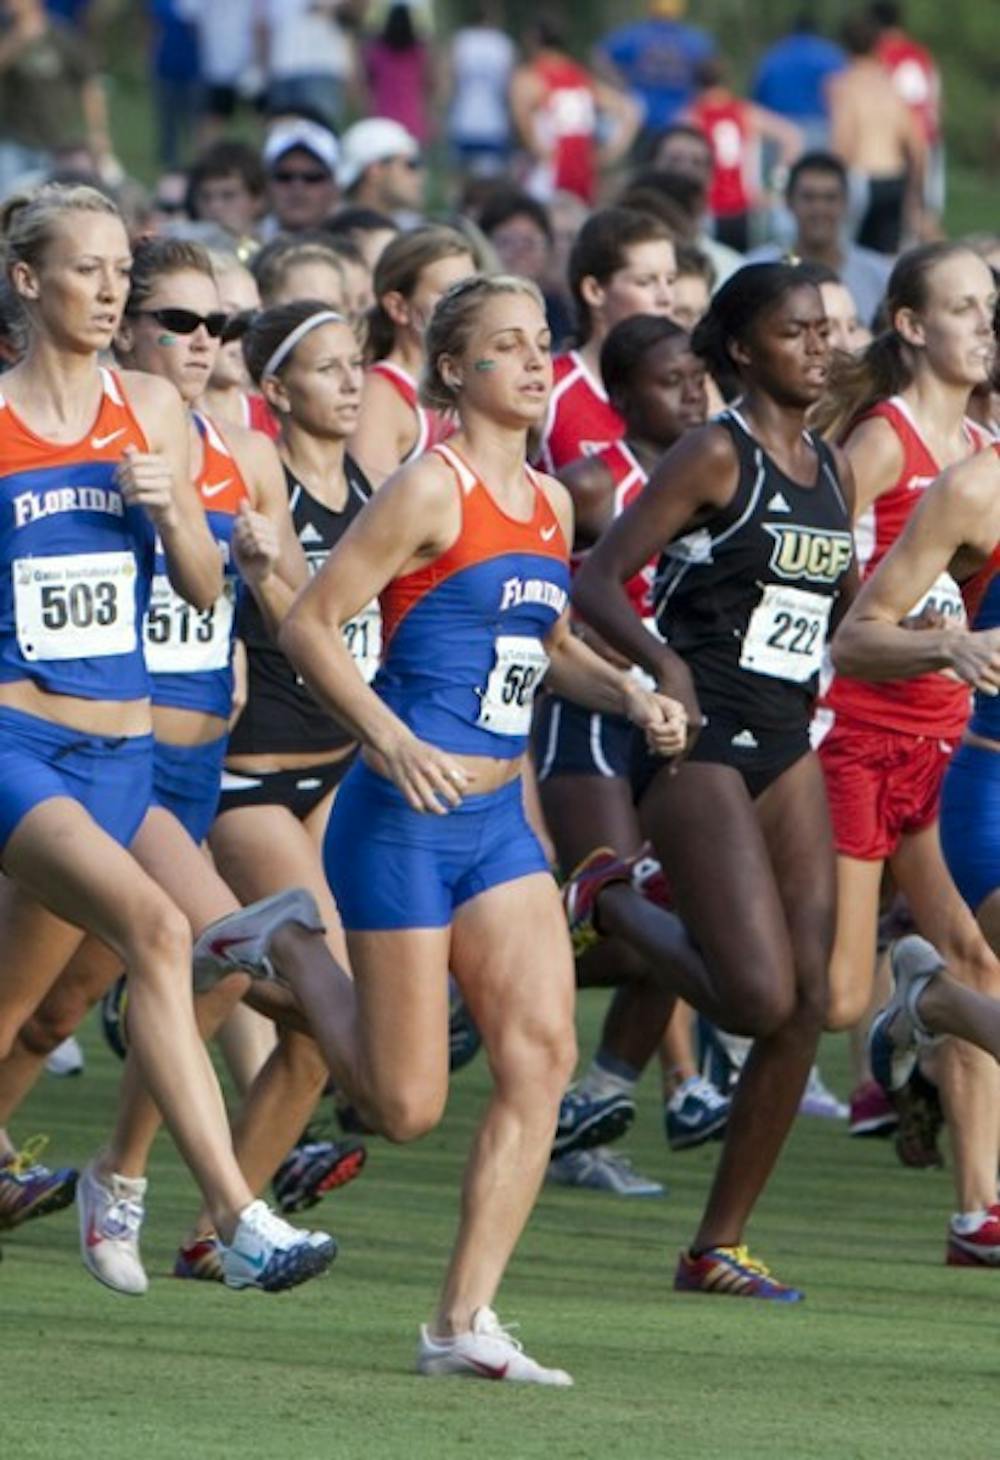 <p>Runner Genevieve LaCaze said the Gators will seek to improve their national ranking at the adidas Invitational on Oct. 14.</p>